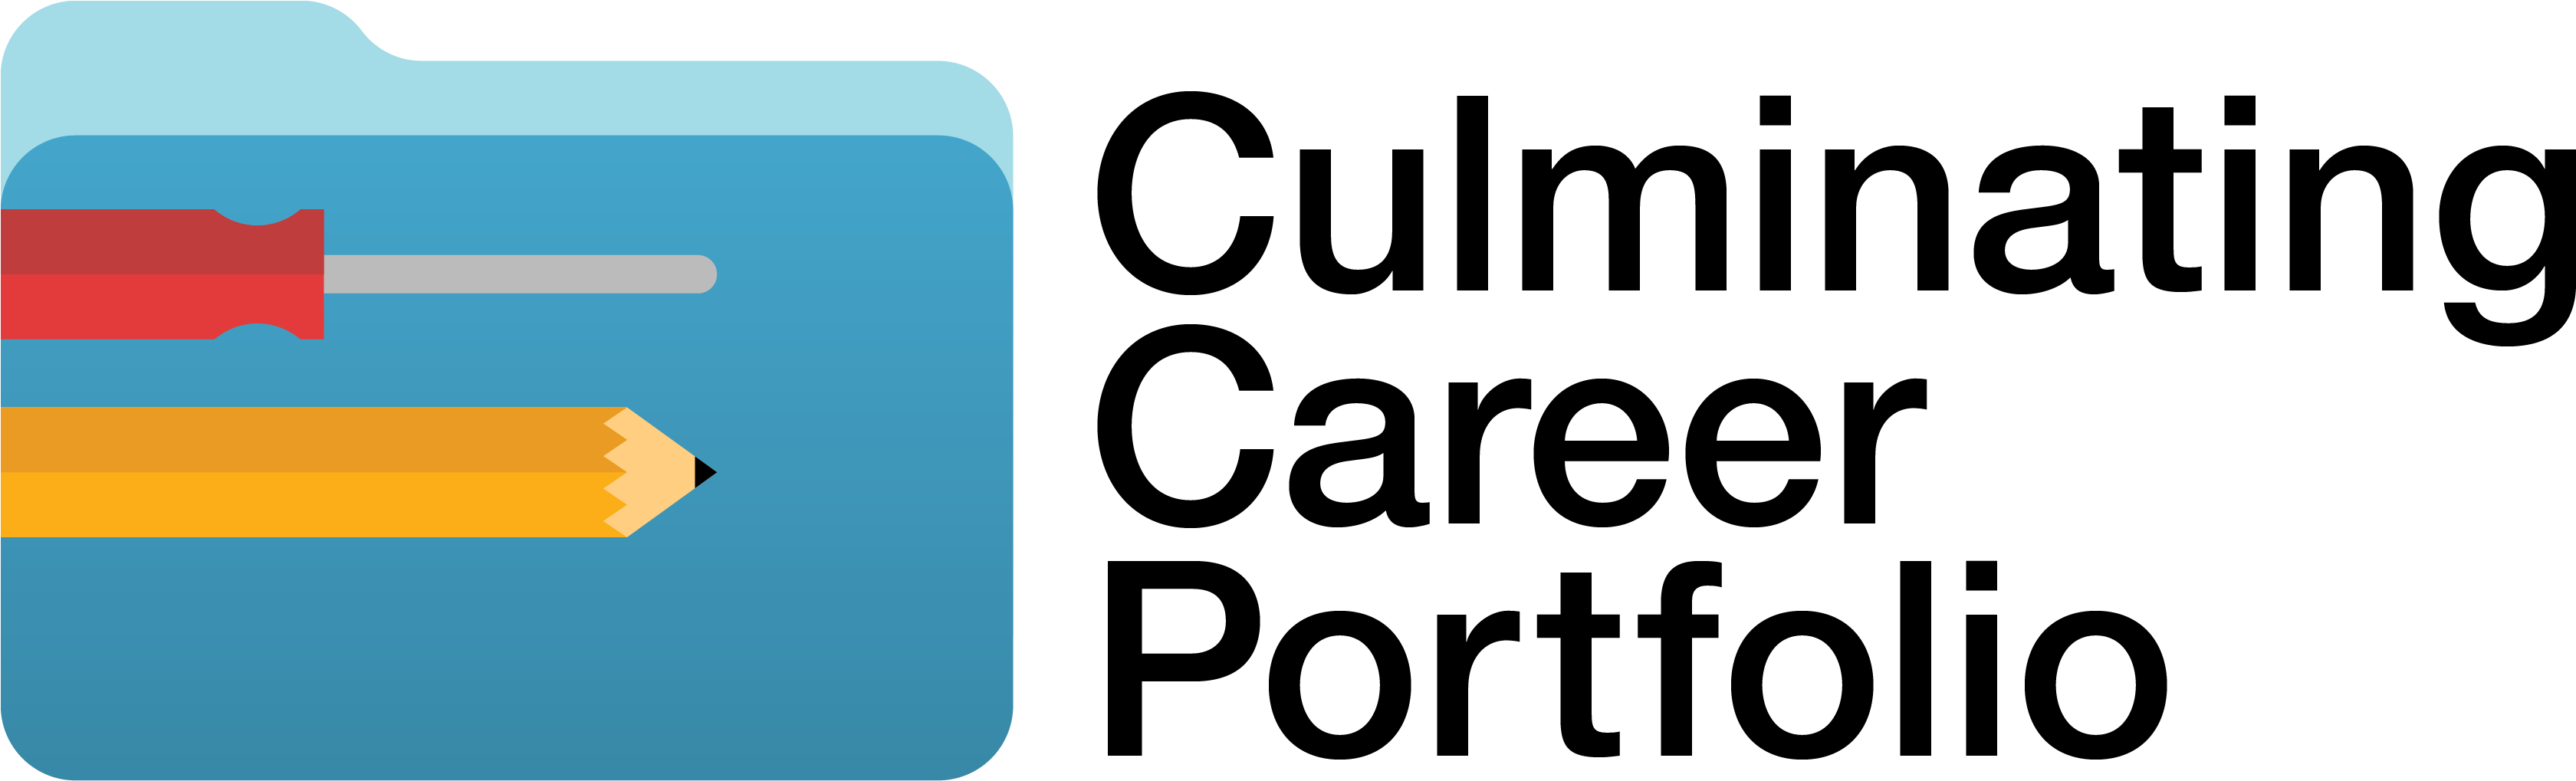 A Blue Rectangle With Black Background